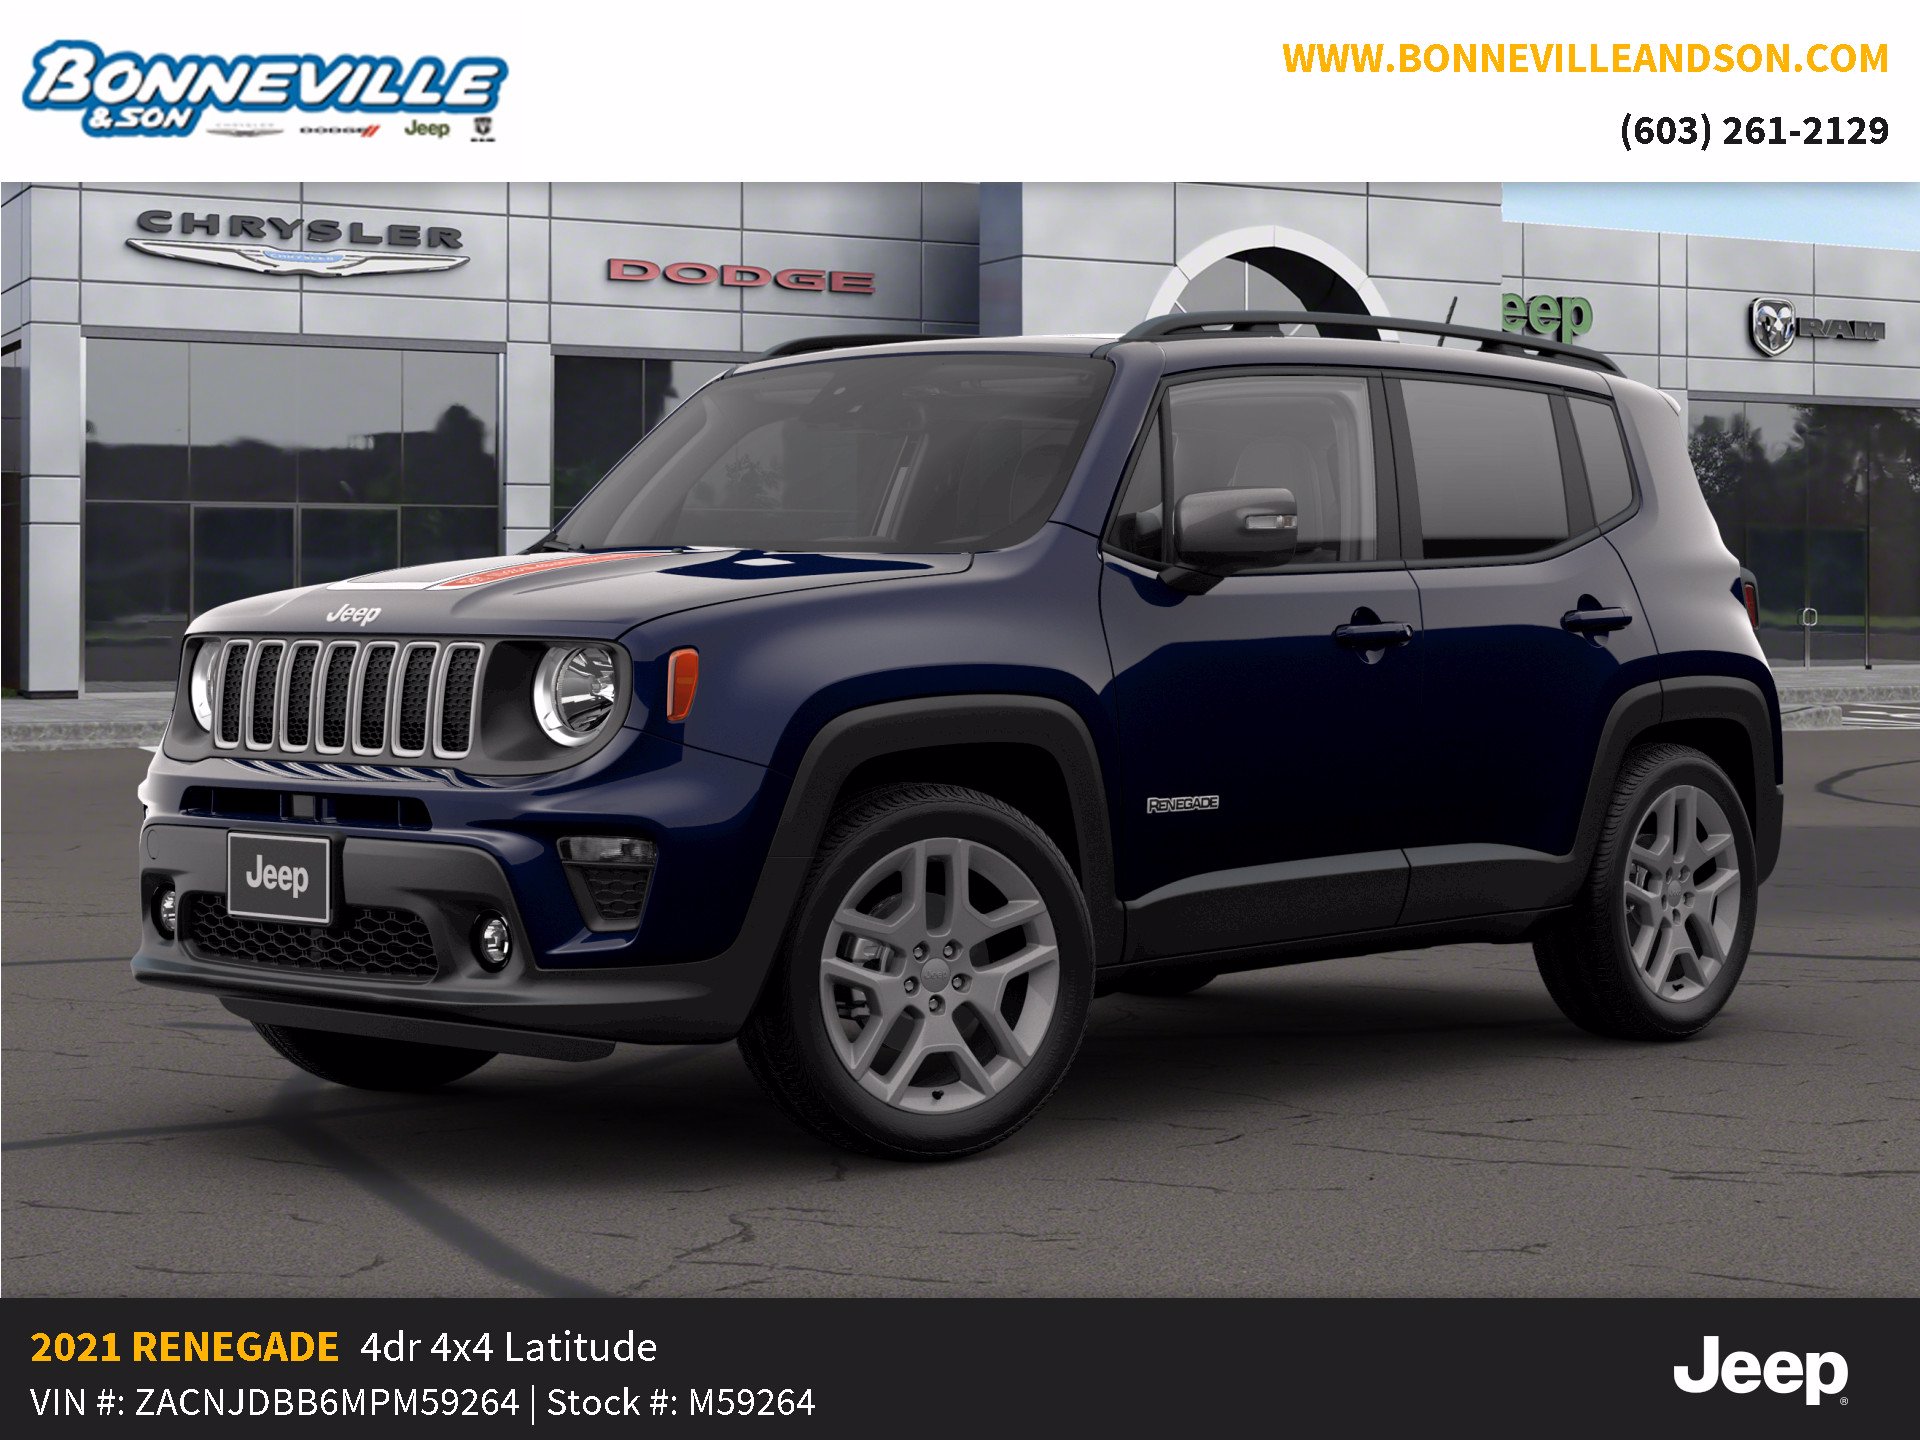 New Jeep Renegade Models For Sale In Manchester Nh